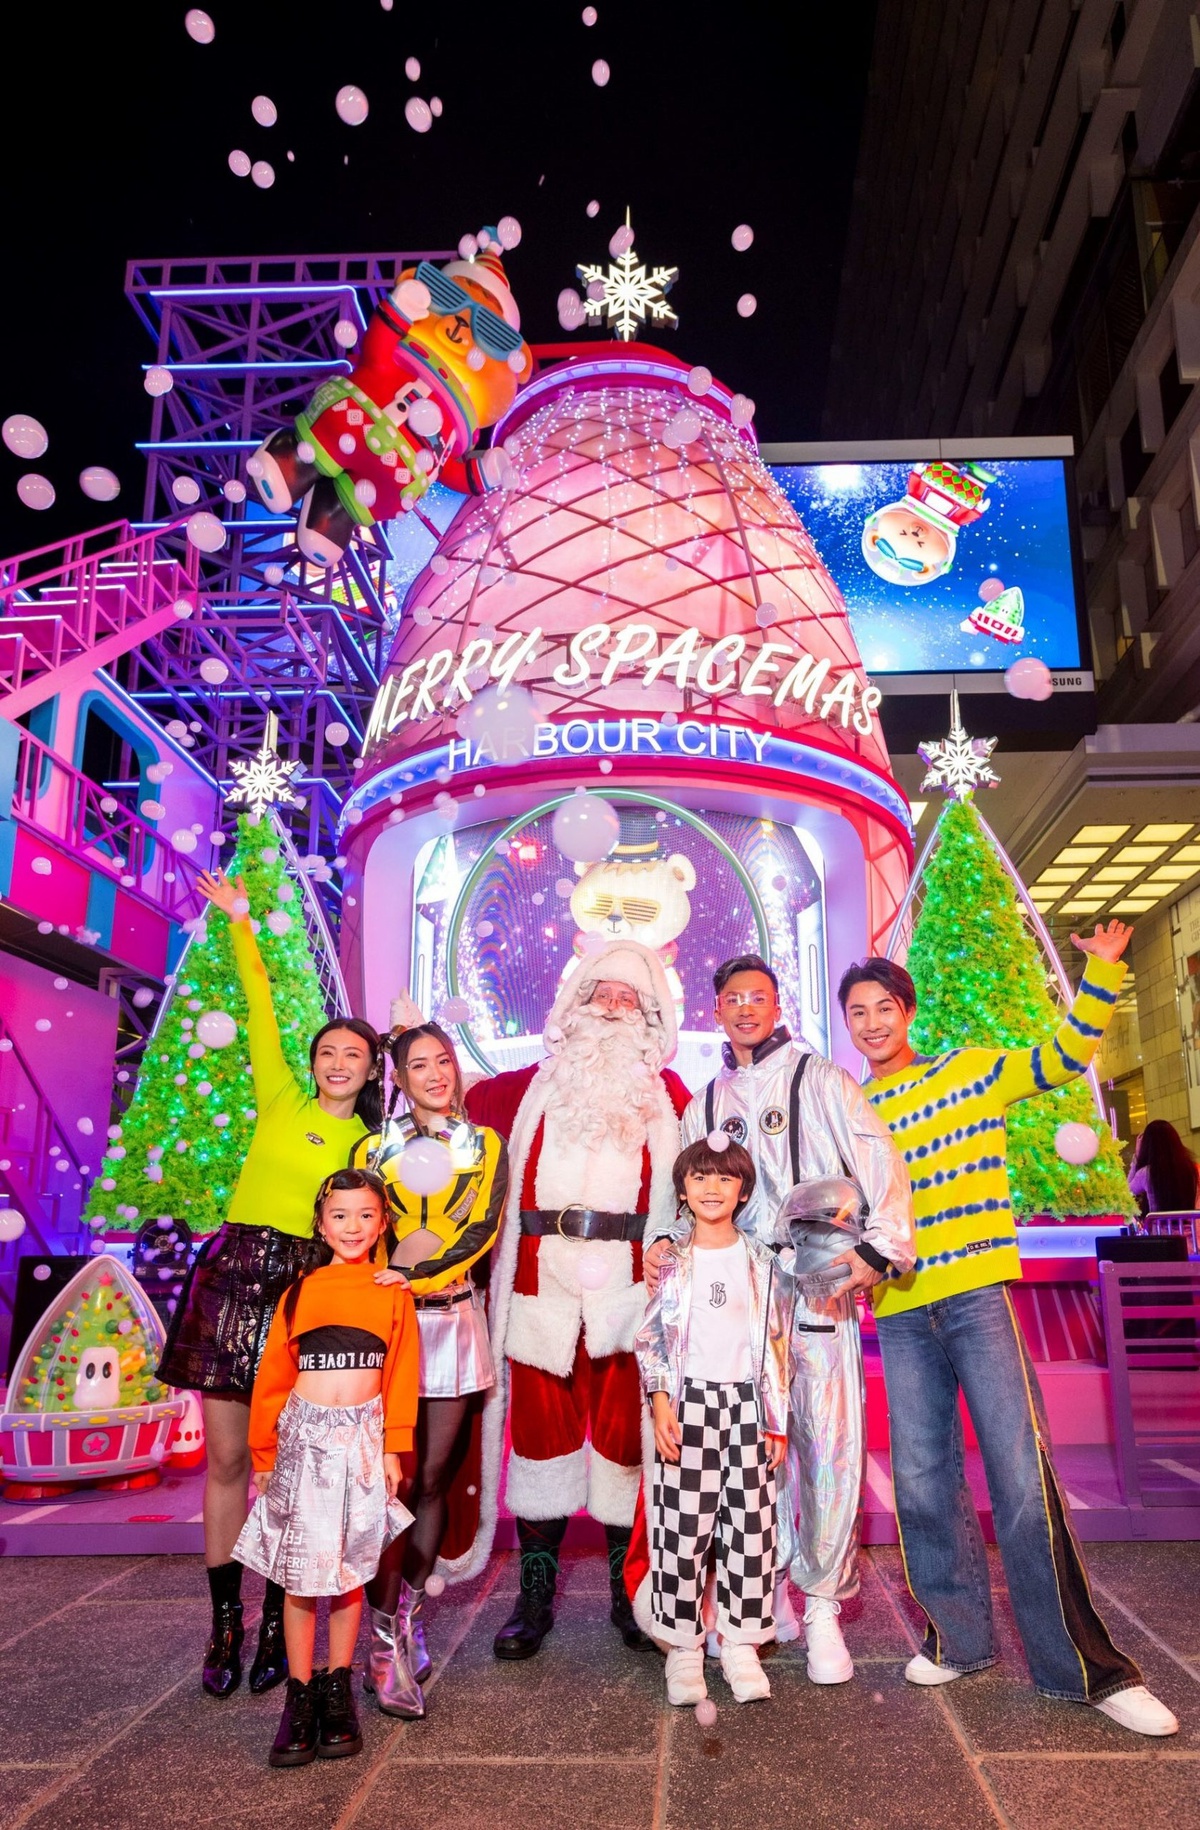 Harbour City Shopping Mall in Hong Kong hosted a lighting ceremony to launch its Merry Spacemas Outdoor Christmas Decoration